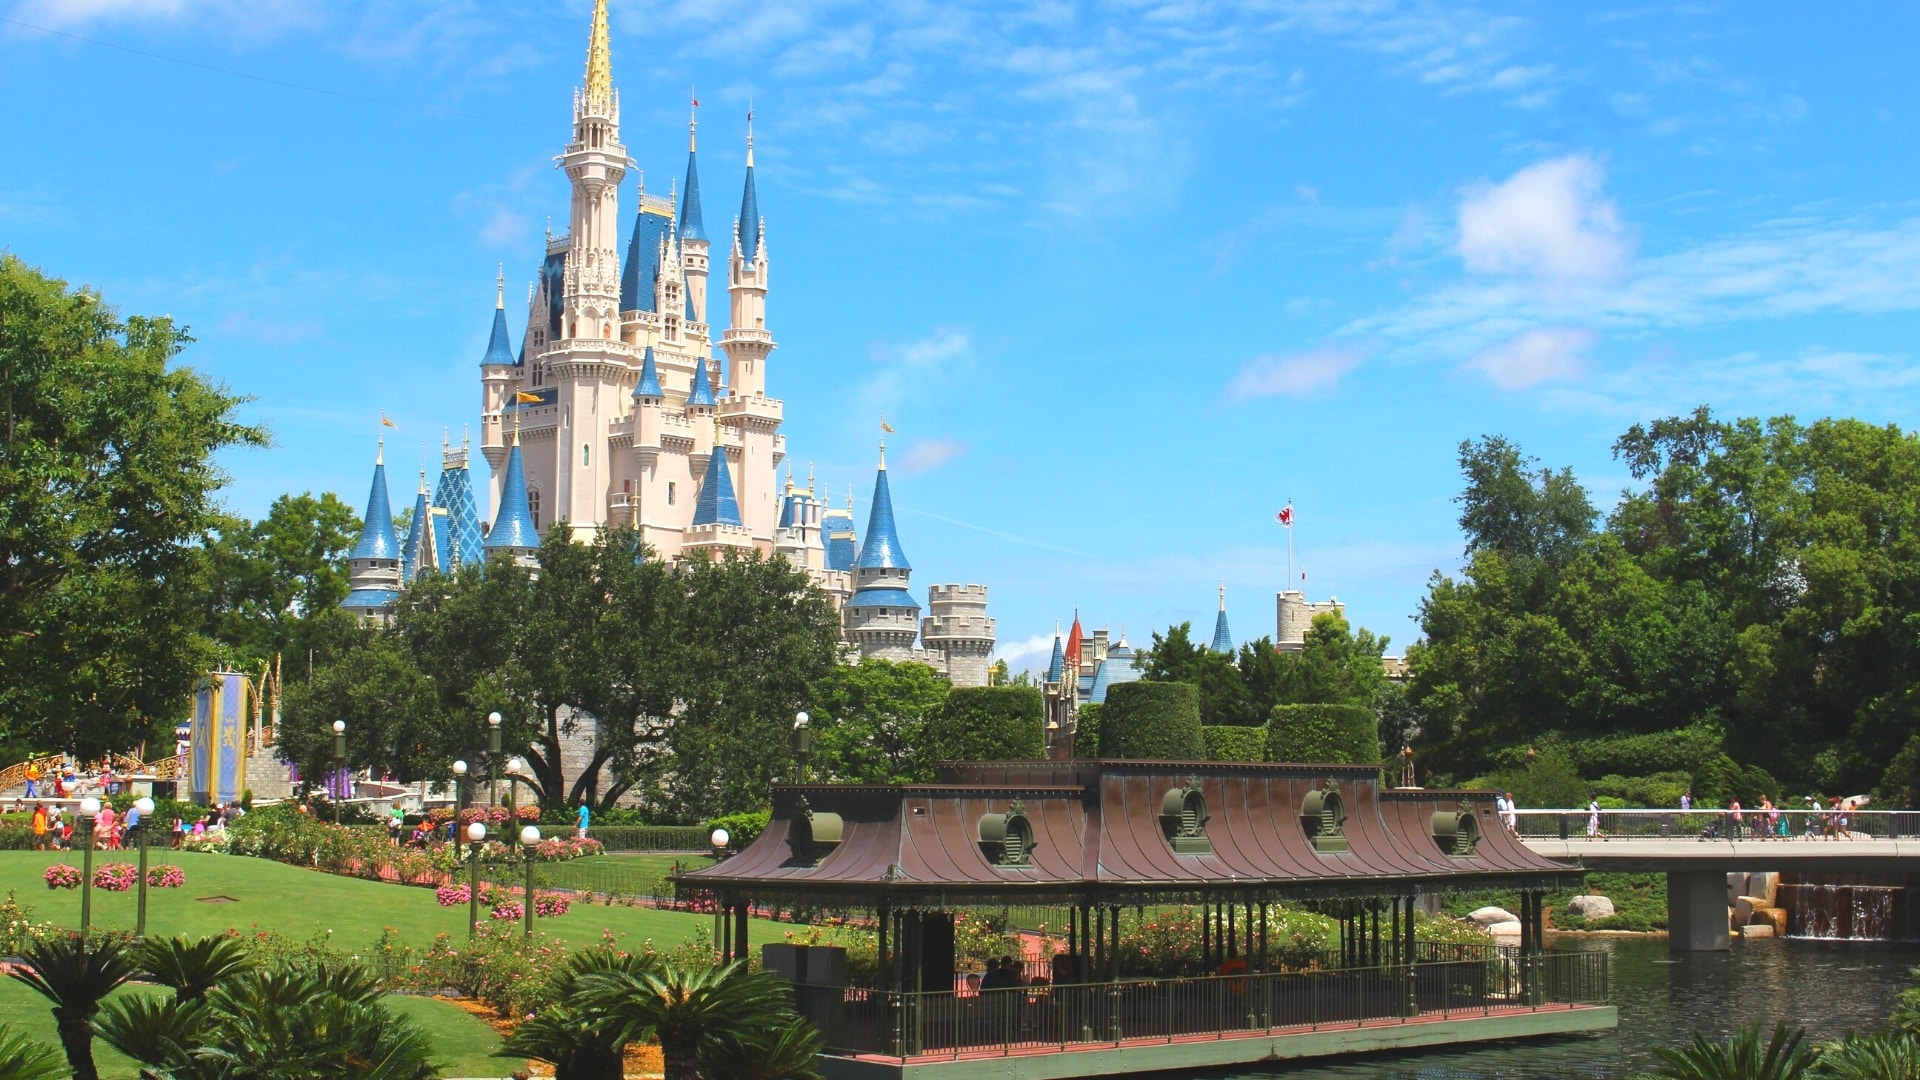 First Time to Disney World Must See - Cinderella Castle at Magic Kingdom